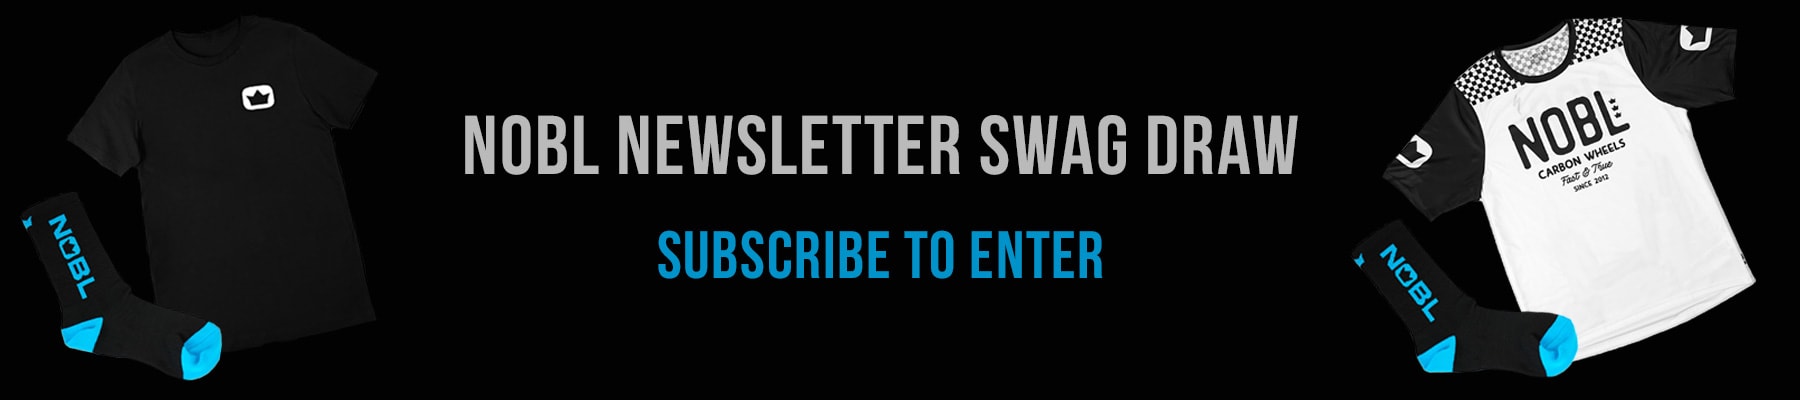 NOBL Newsletter Swag Draw | Subscribe to enter.